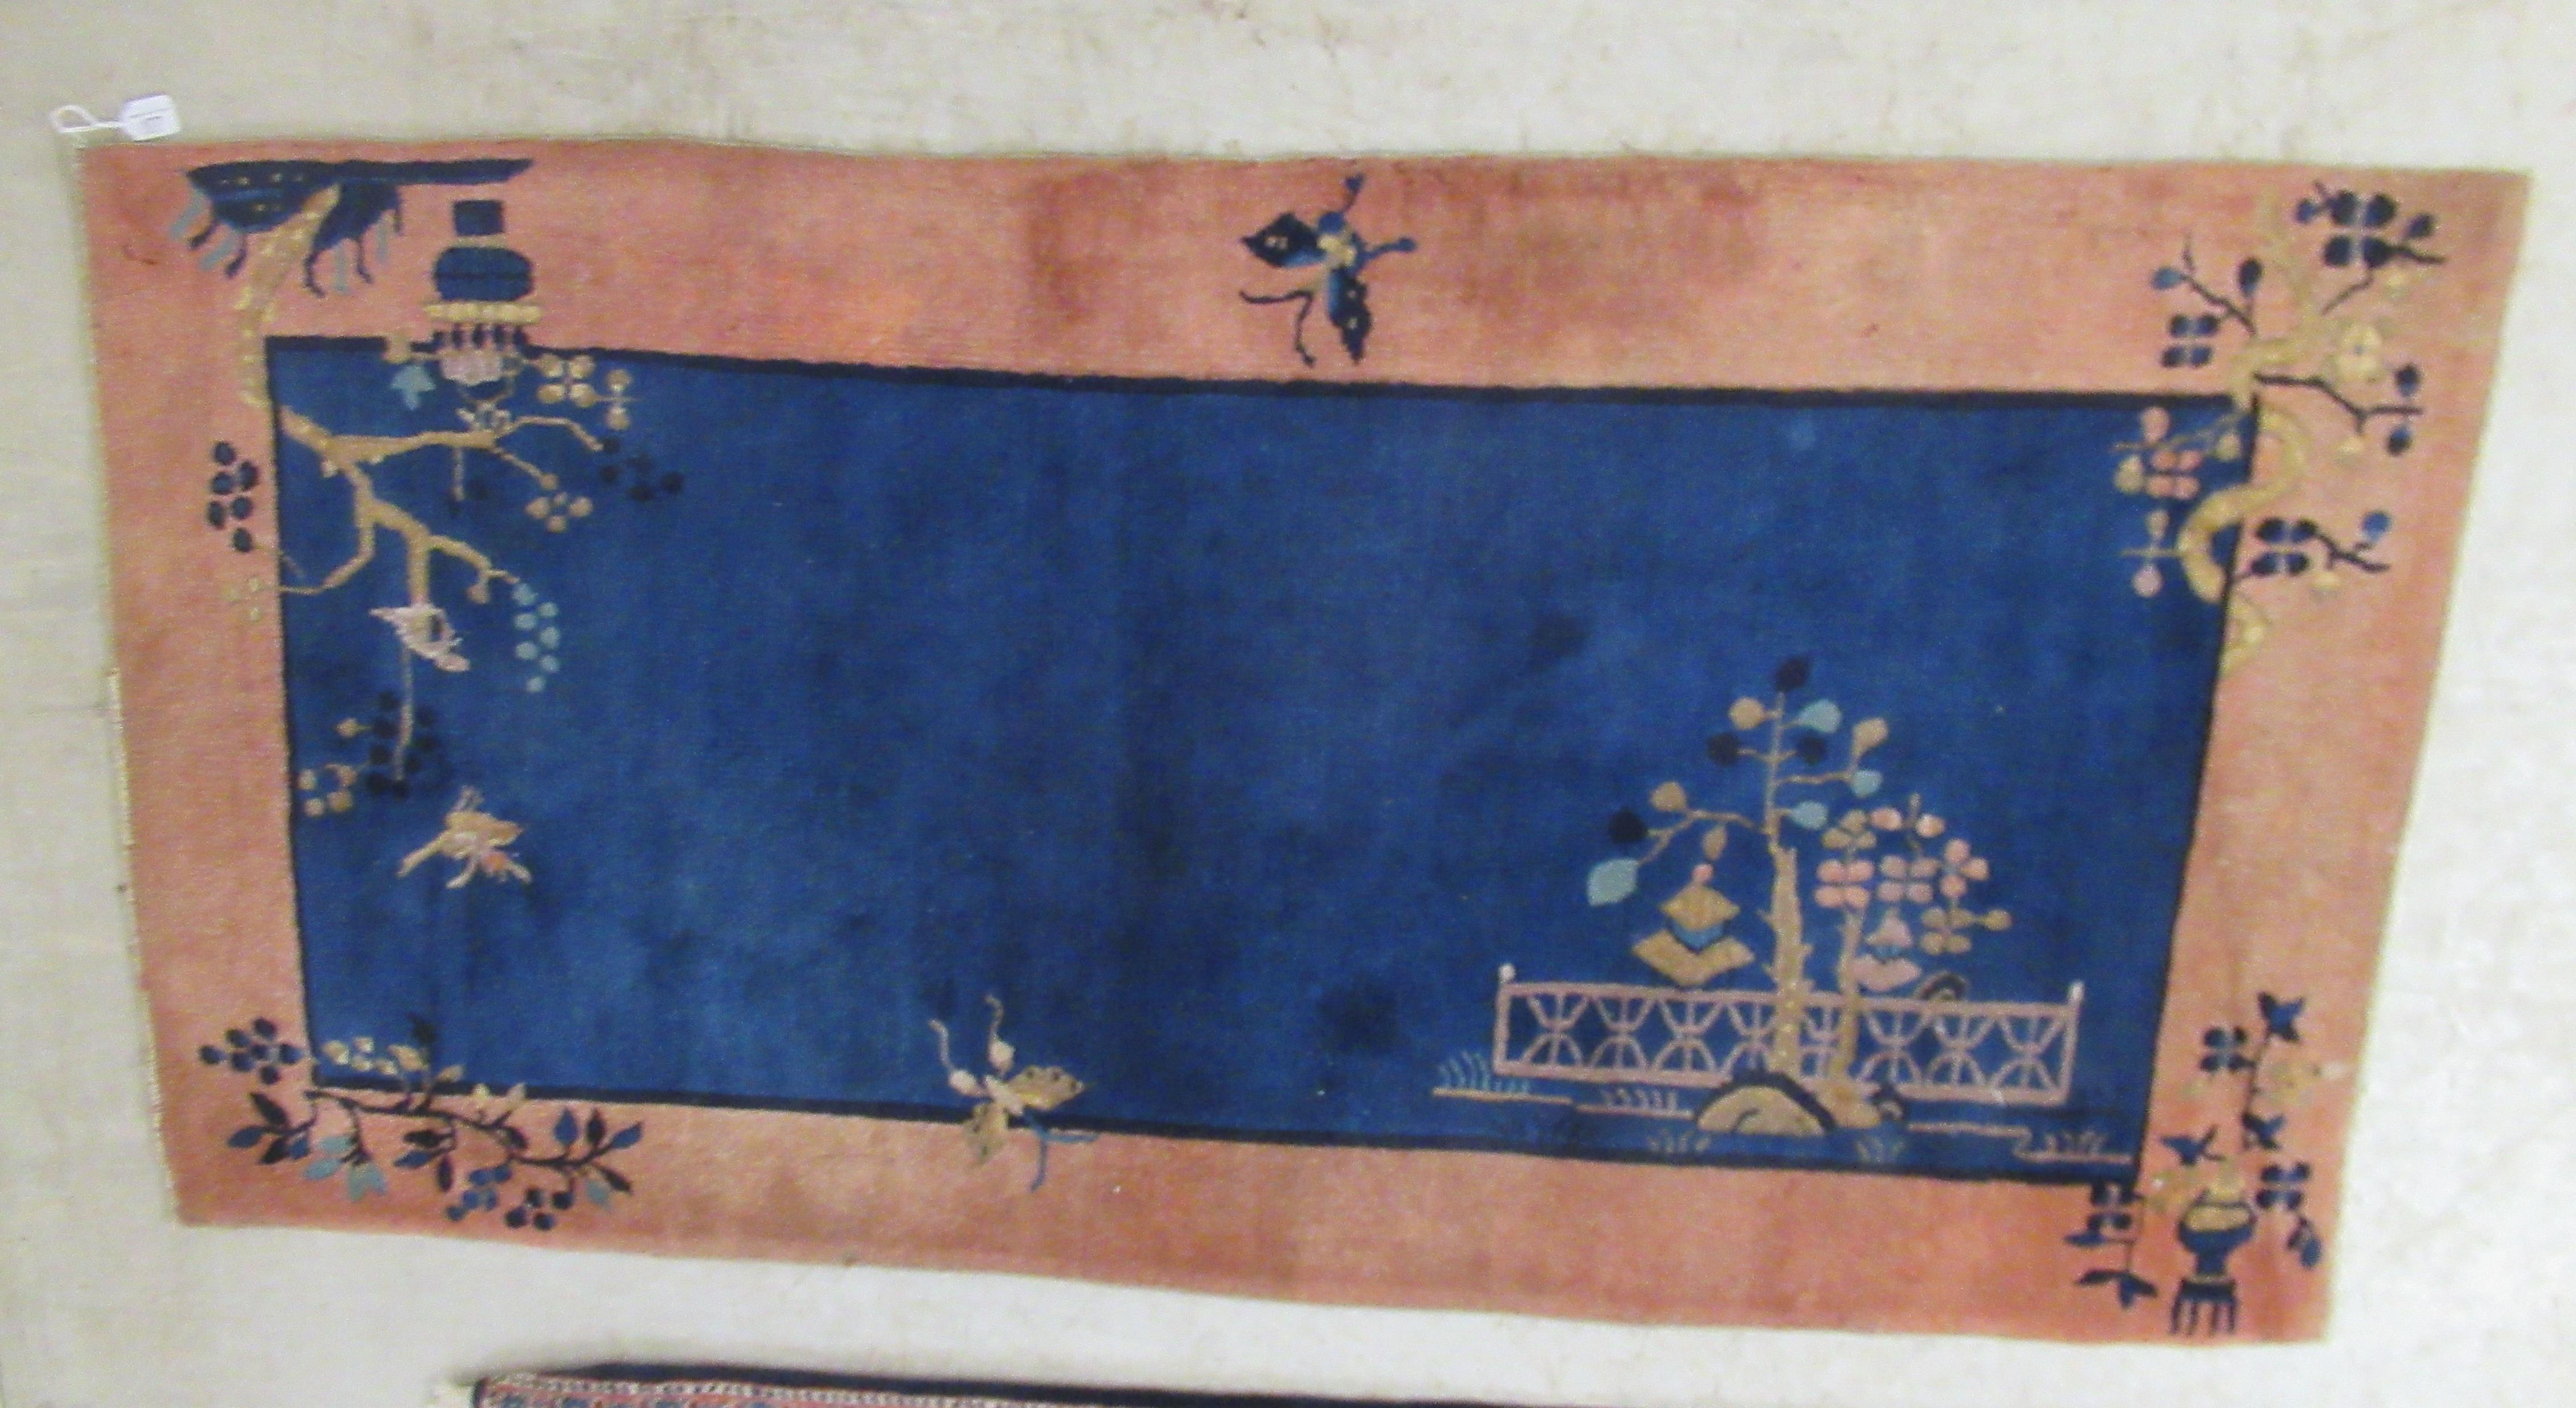 A Chinese Export woollen rug, circa 1950, decorated with a landscape on a mainly blue coloured